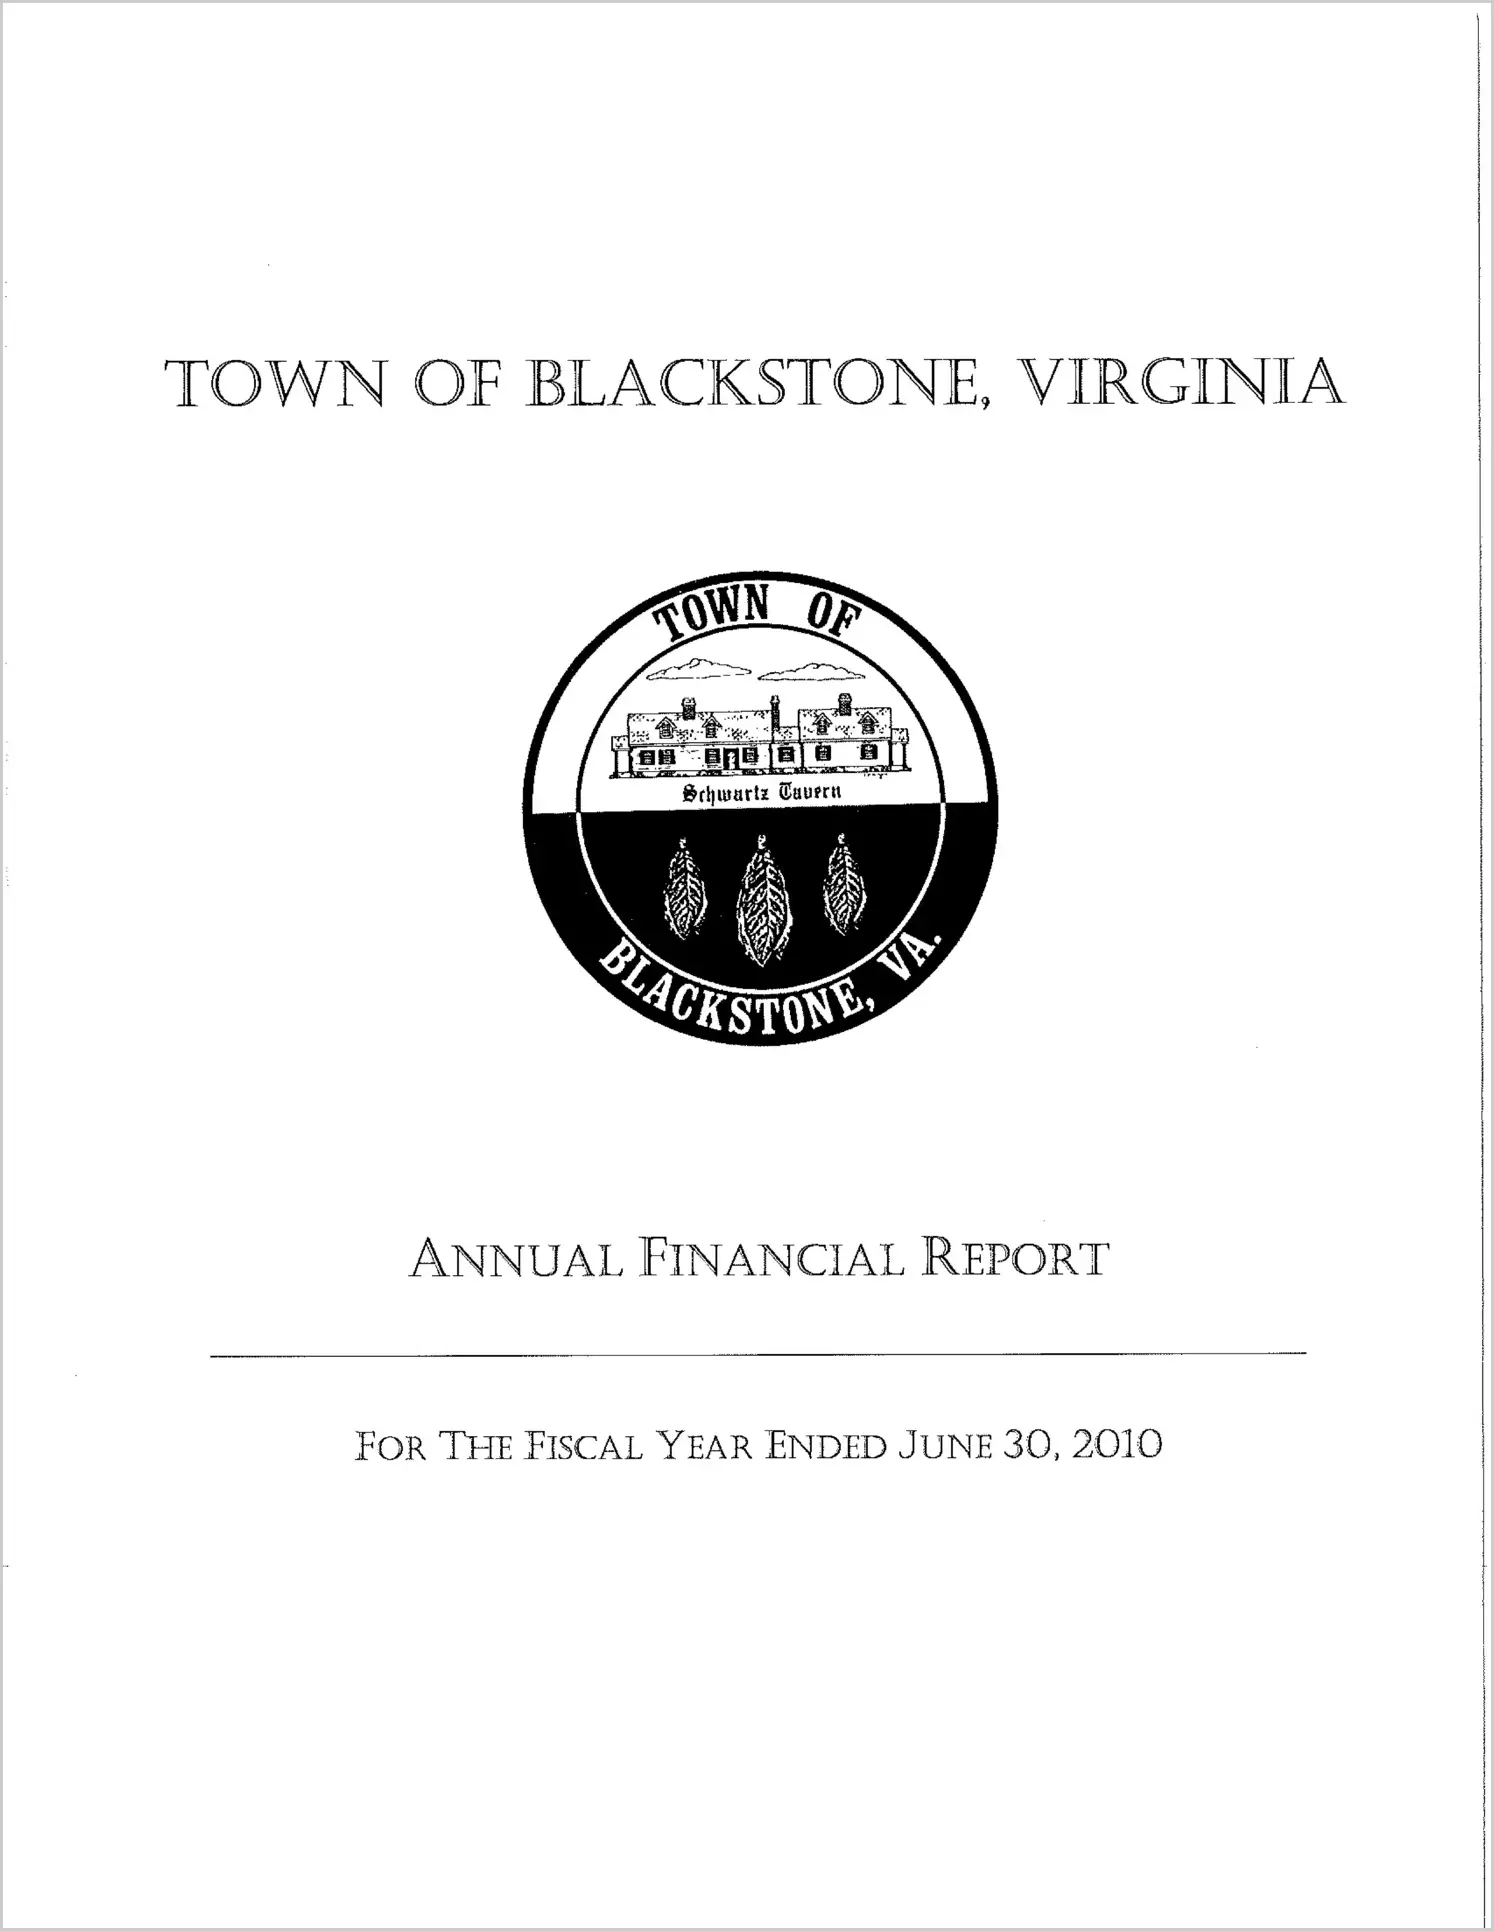 2010 Annual Financial Report for Town of Blackstone